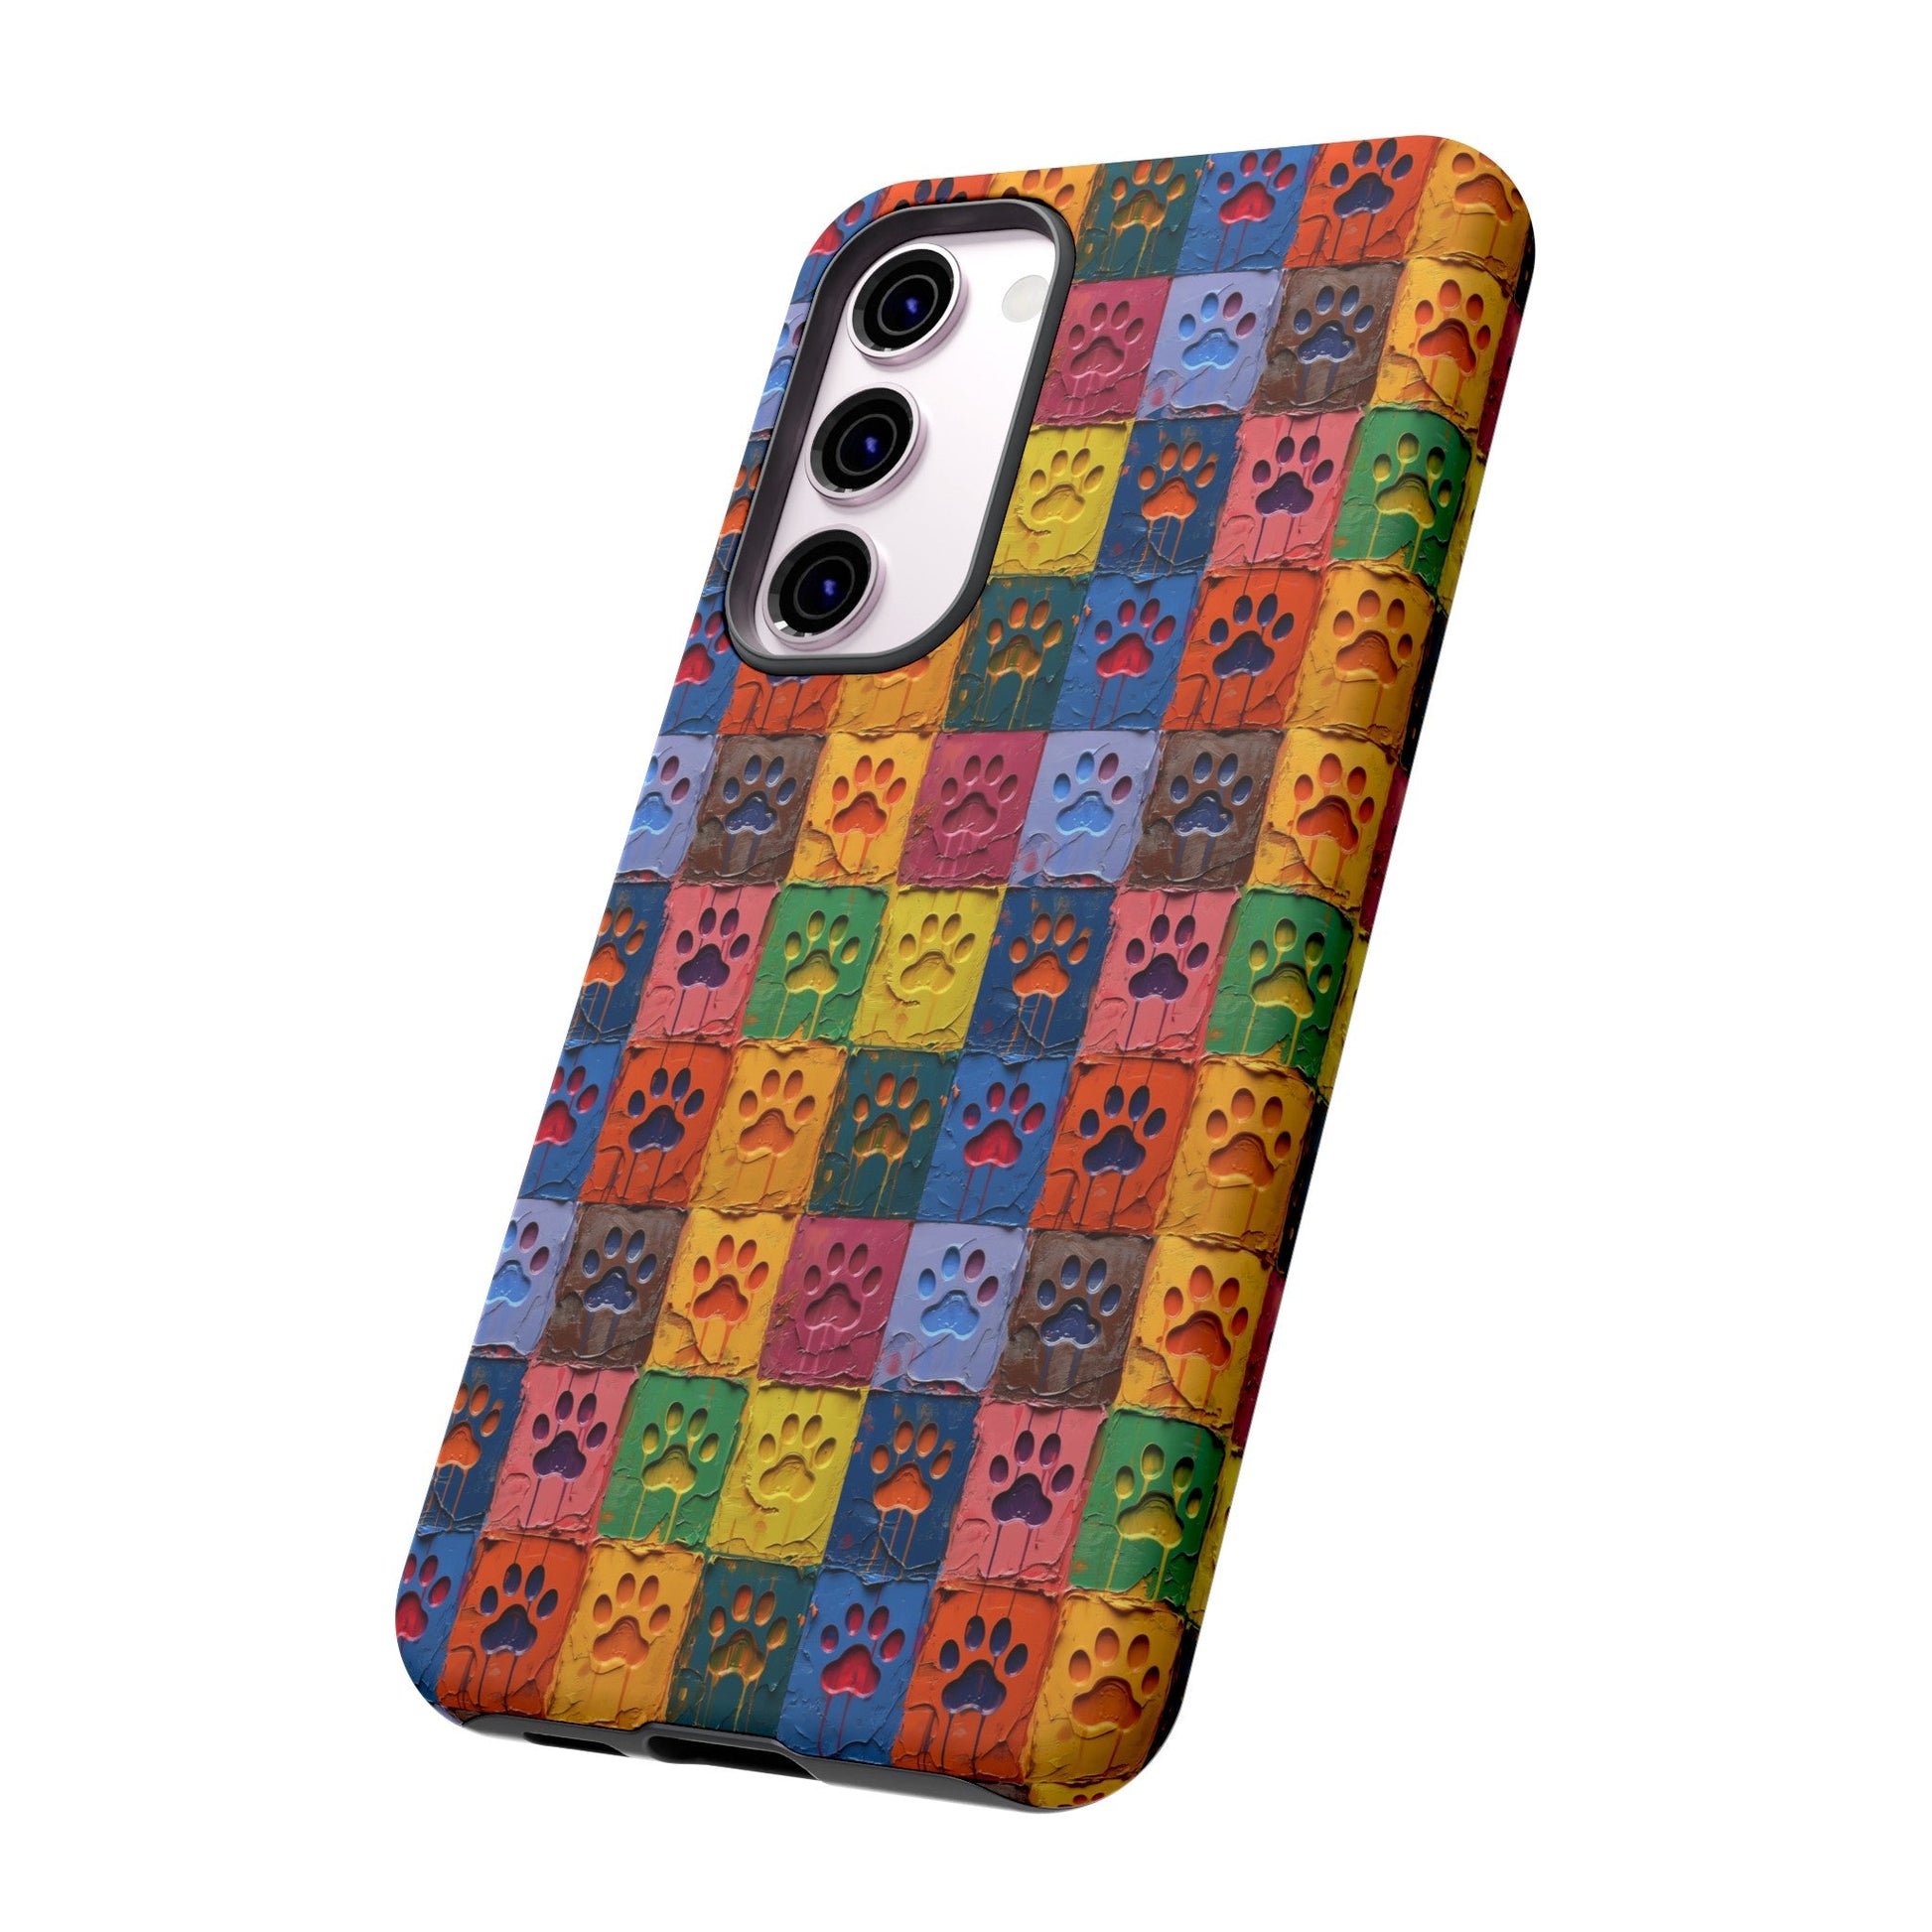 Toughened Mobile Phone Case Featuring Large Painted Paw Prints - Hobbster